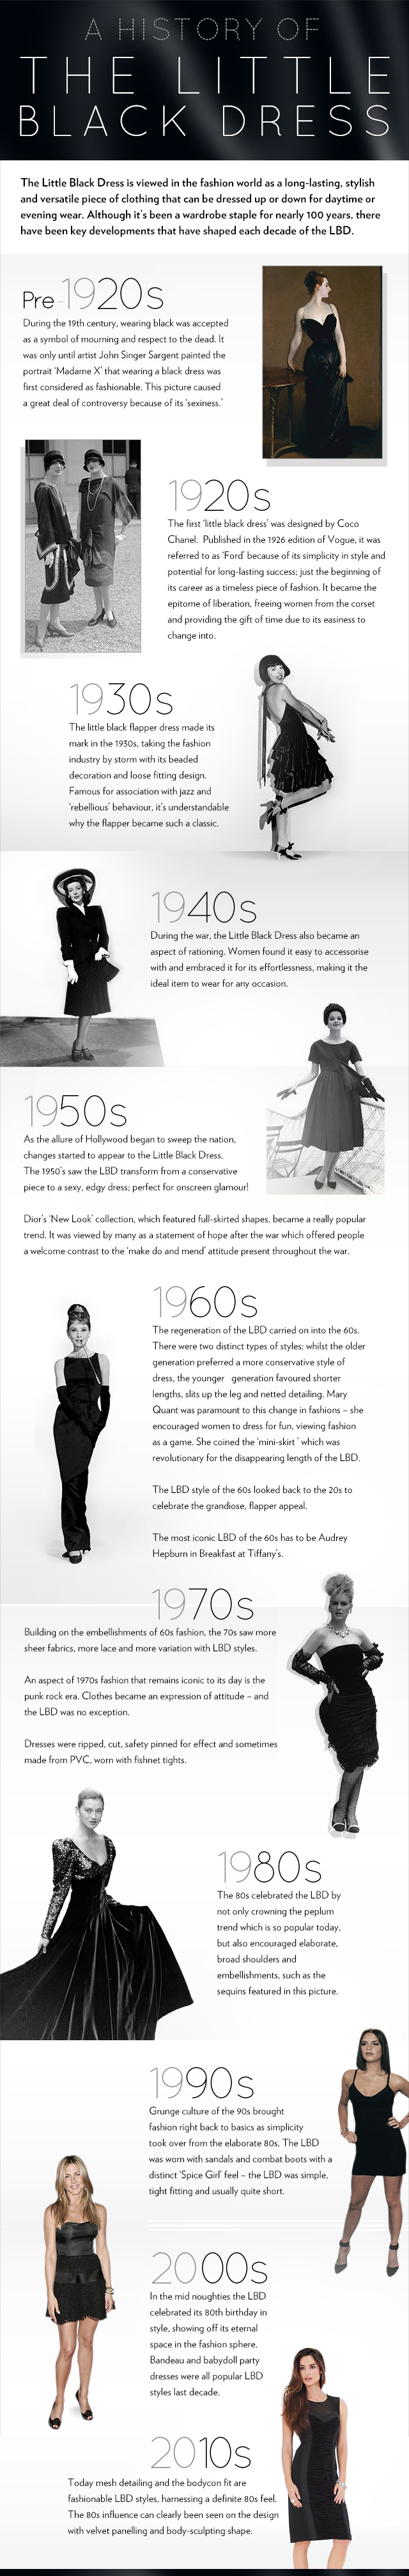  The History Of The Little Black Dress